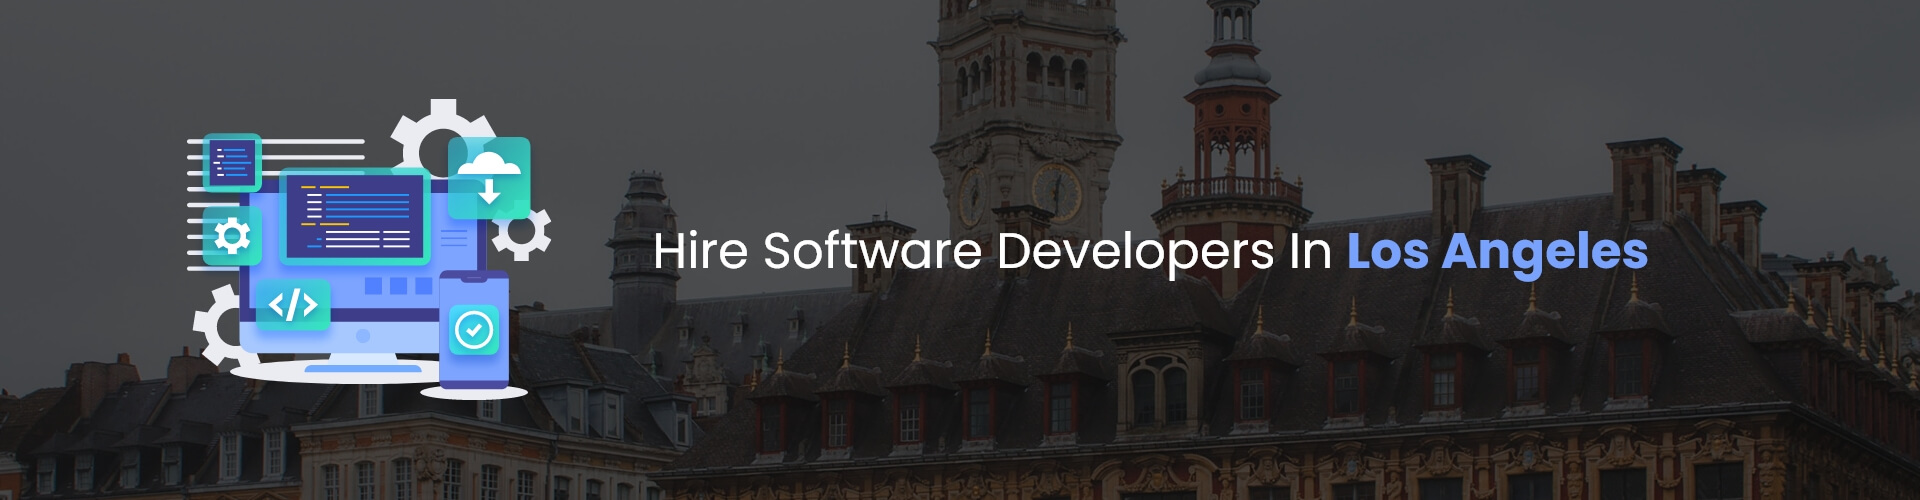 hire software developers in los angeles